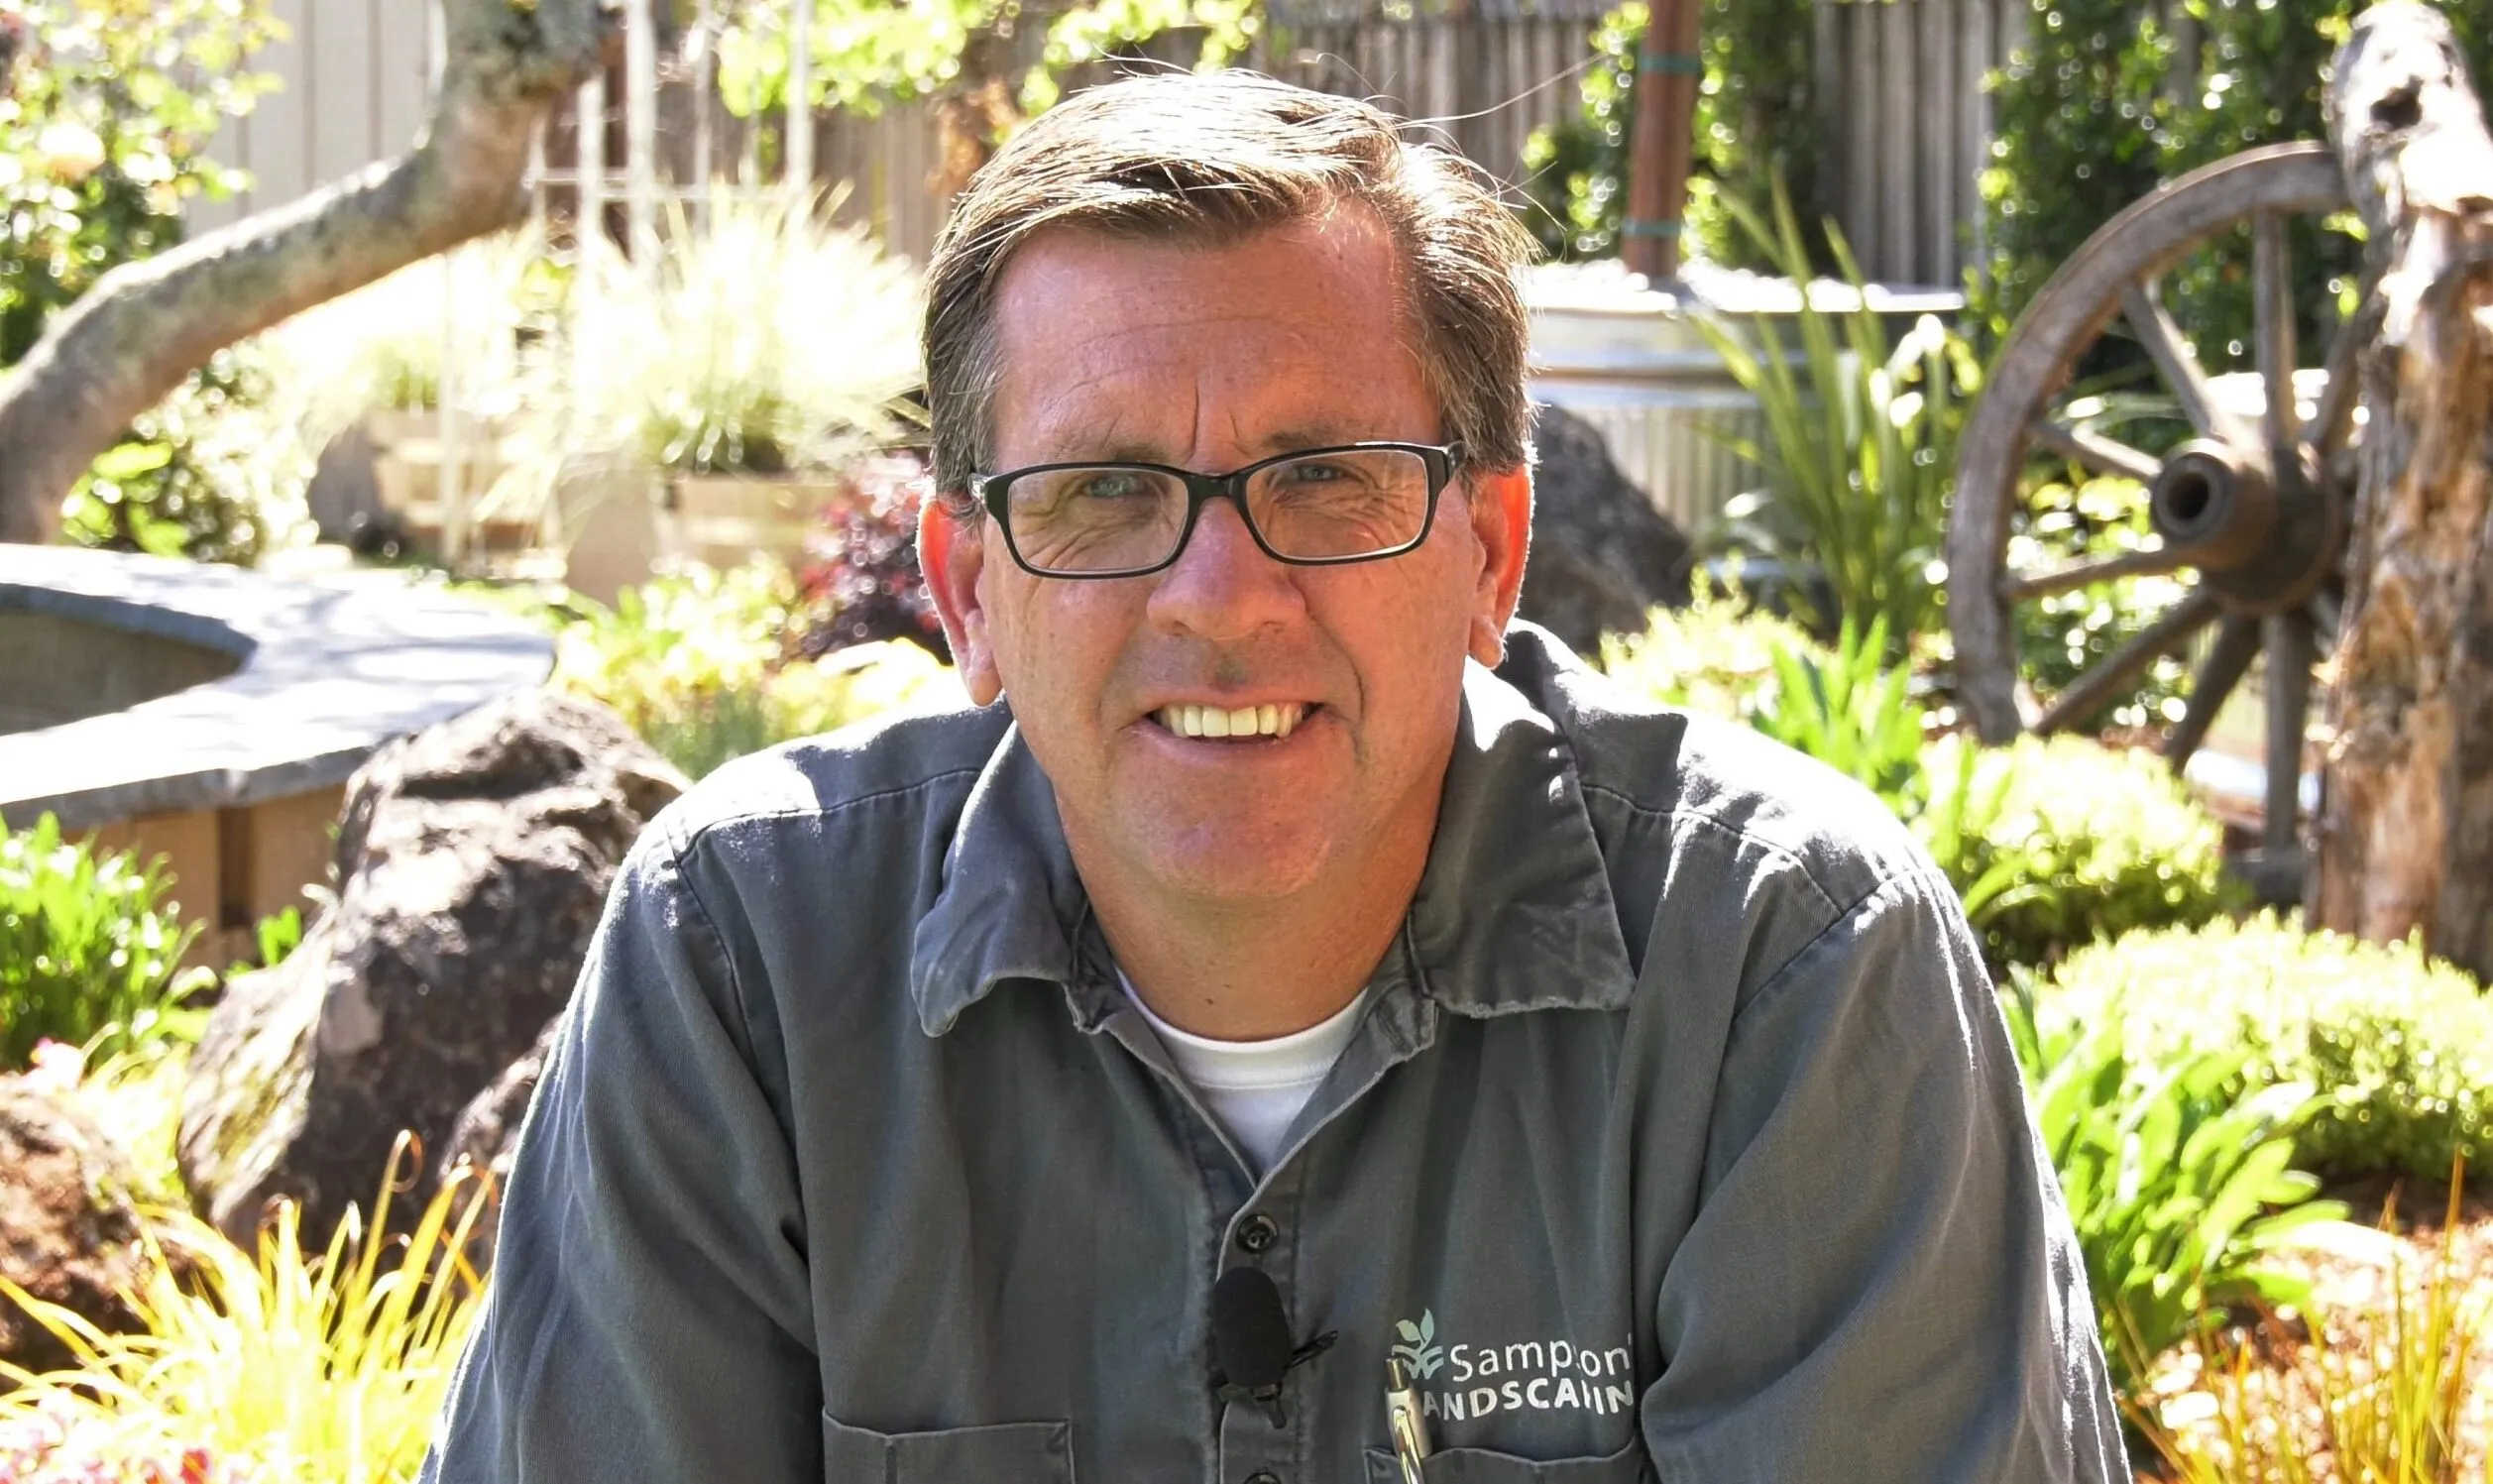 Aaron Sampson is CEO of Sampson’s Landscaping, Inc., a Diamond Certified company. He can be reached at (415) 582-4375 or by email.